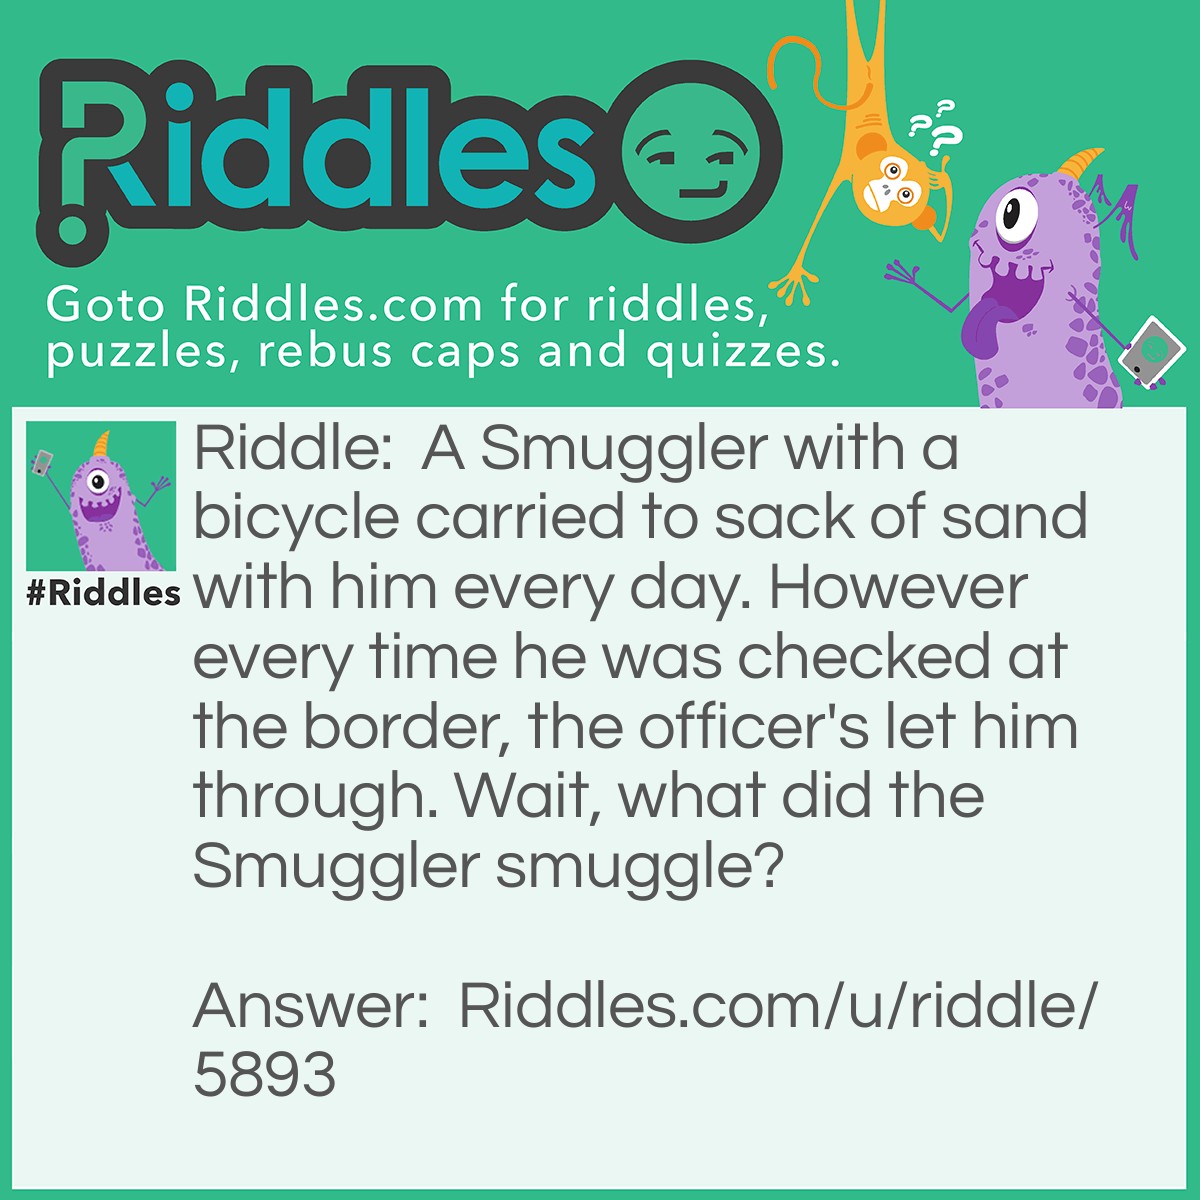 Riddle: A Smuggler with a bicycle carried to sack of sand with him every day. However every time he was checked at the border, the officer's let him through. Wait, what did the Smuggler smuggle? Answer: The Smuggler used two sack of sand as a distraction. So that the officer wouldn't notice that he was smuggle the bicycles.